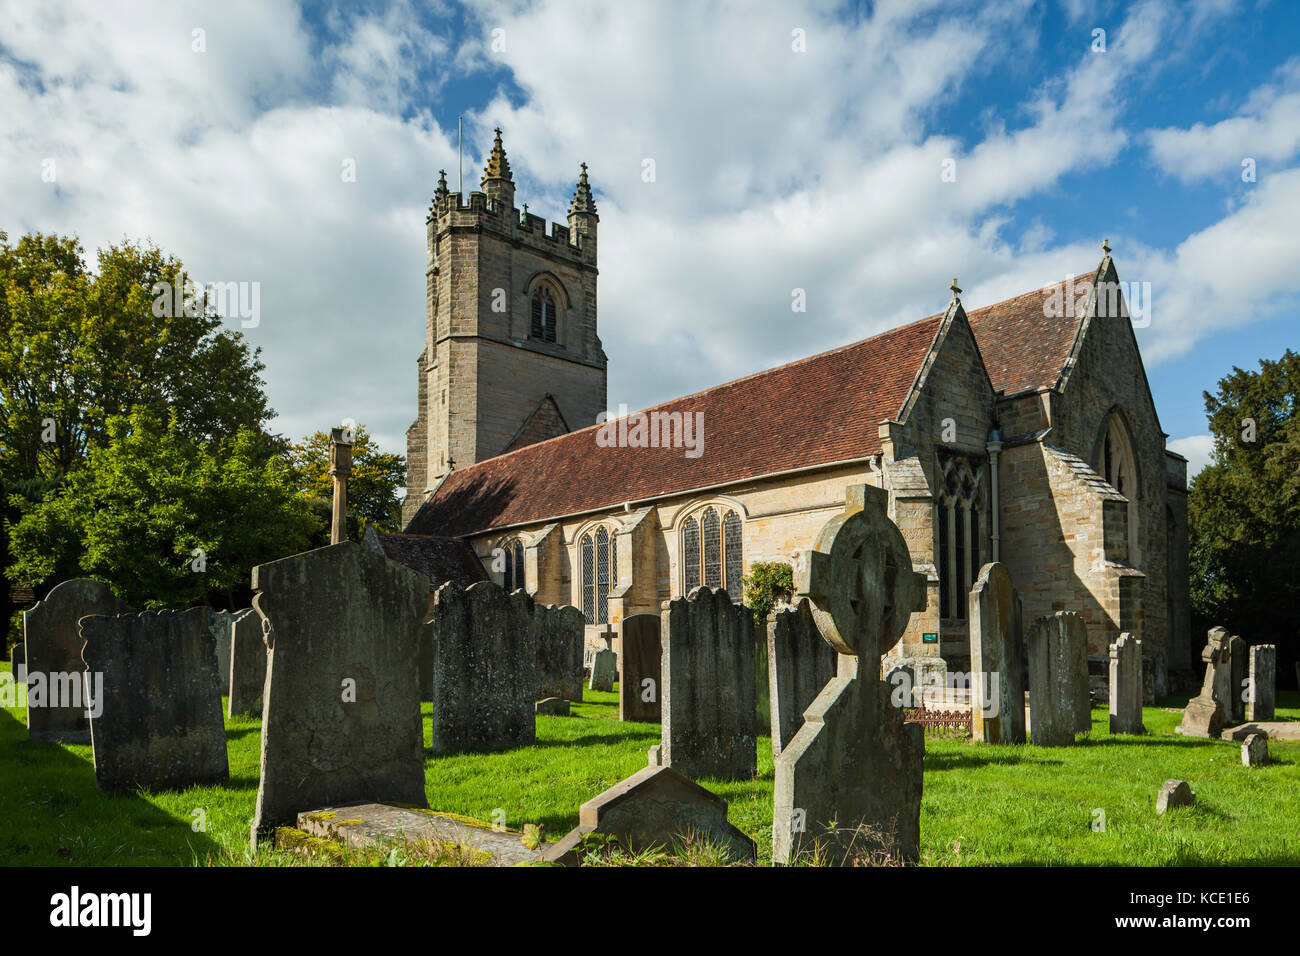 St Mary's church in Chiddingstone village, Kent, England. Stock Photo